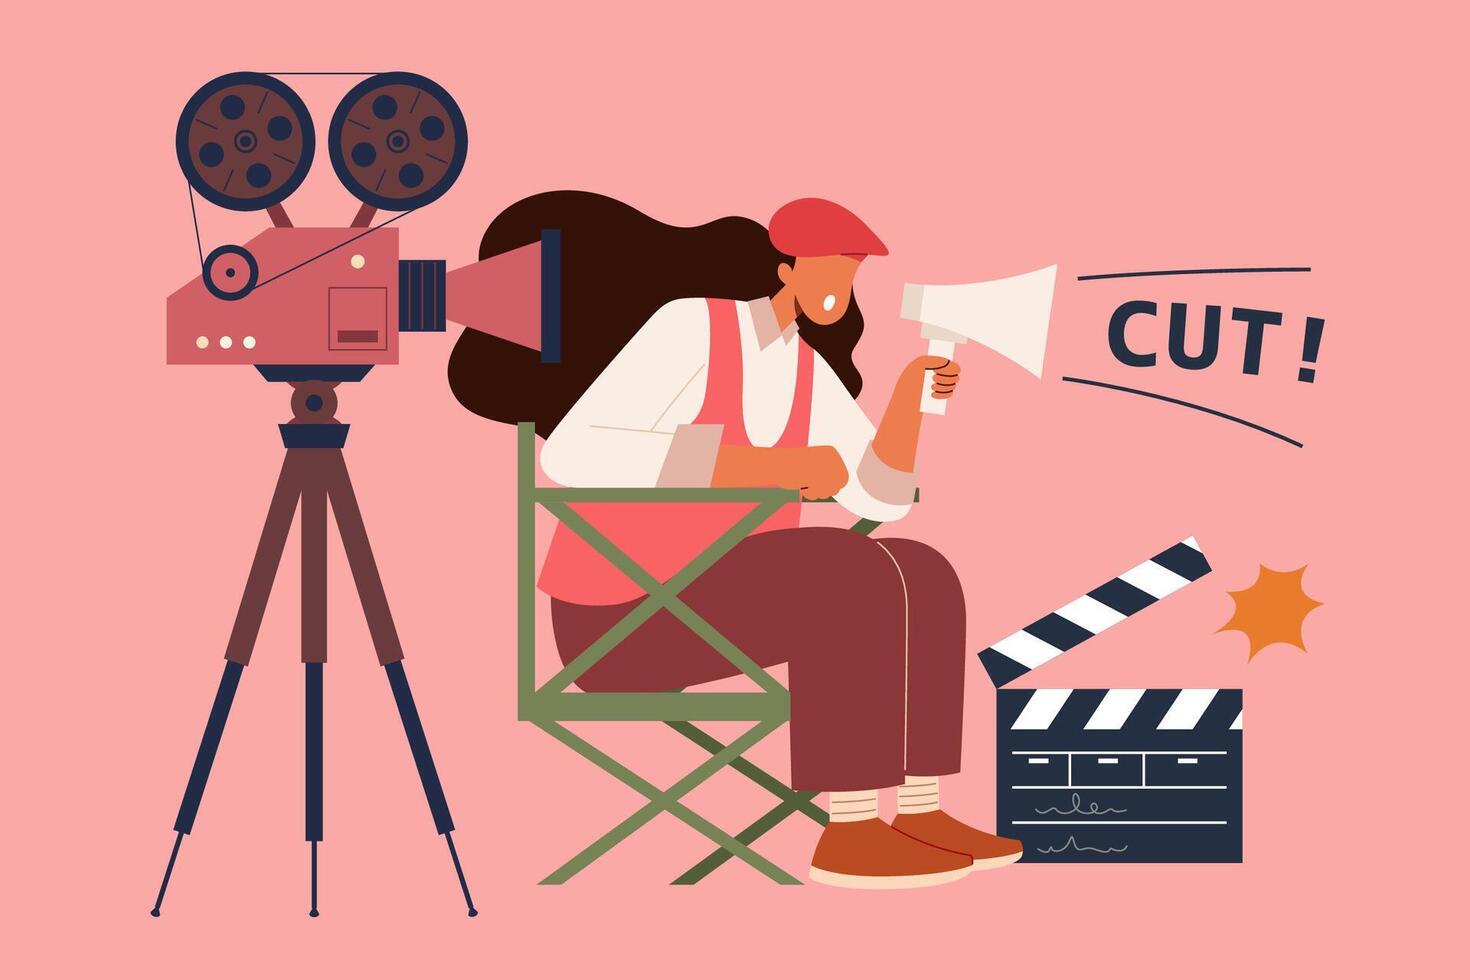 Female film director at work. Flat style illustration of a woman director using megaphone and shouting cut while recording filmin the movie making process vector